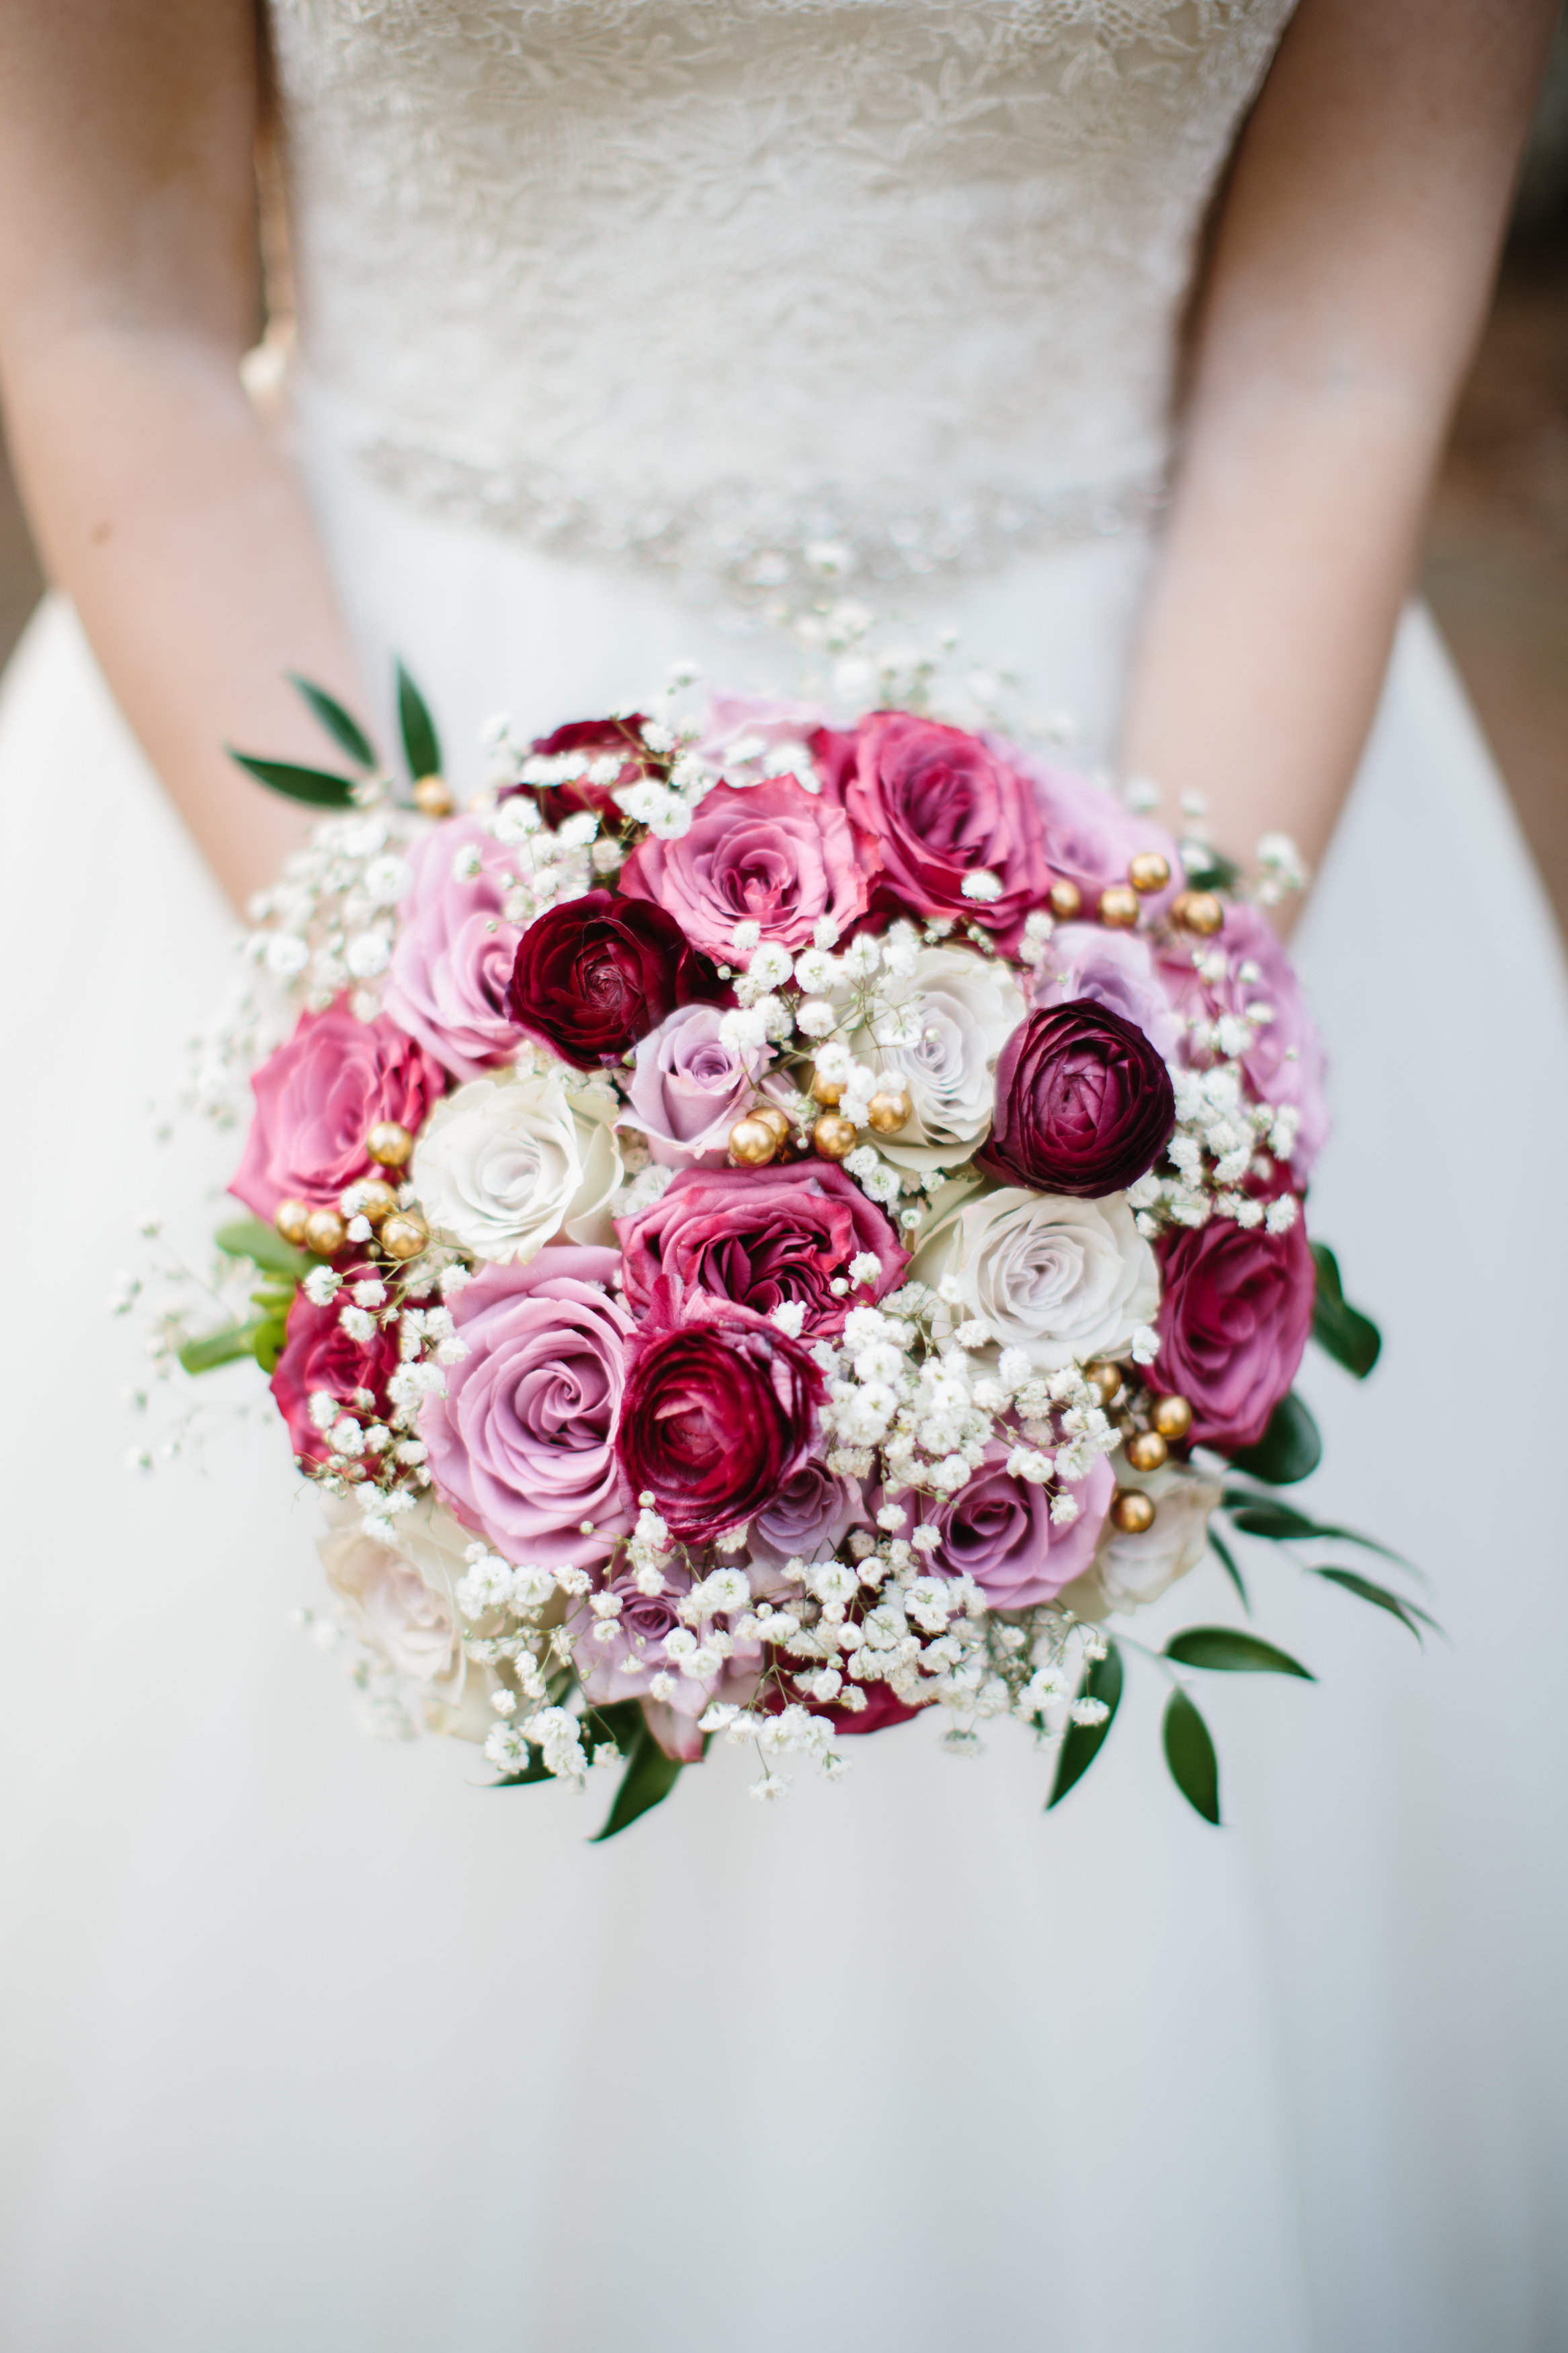  Traditional bridal bouquet by Abbotsford Wedding Florist Floral Design by Lili 